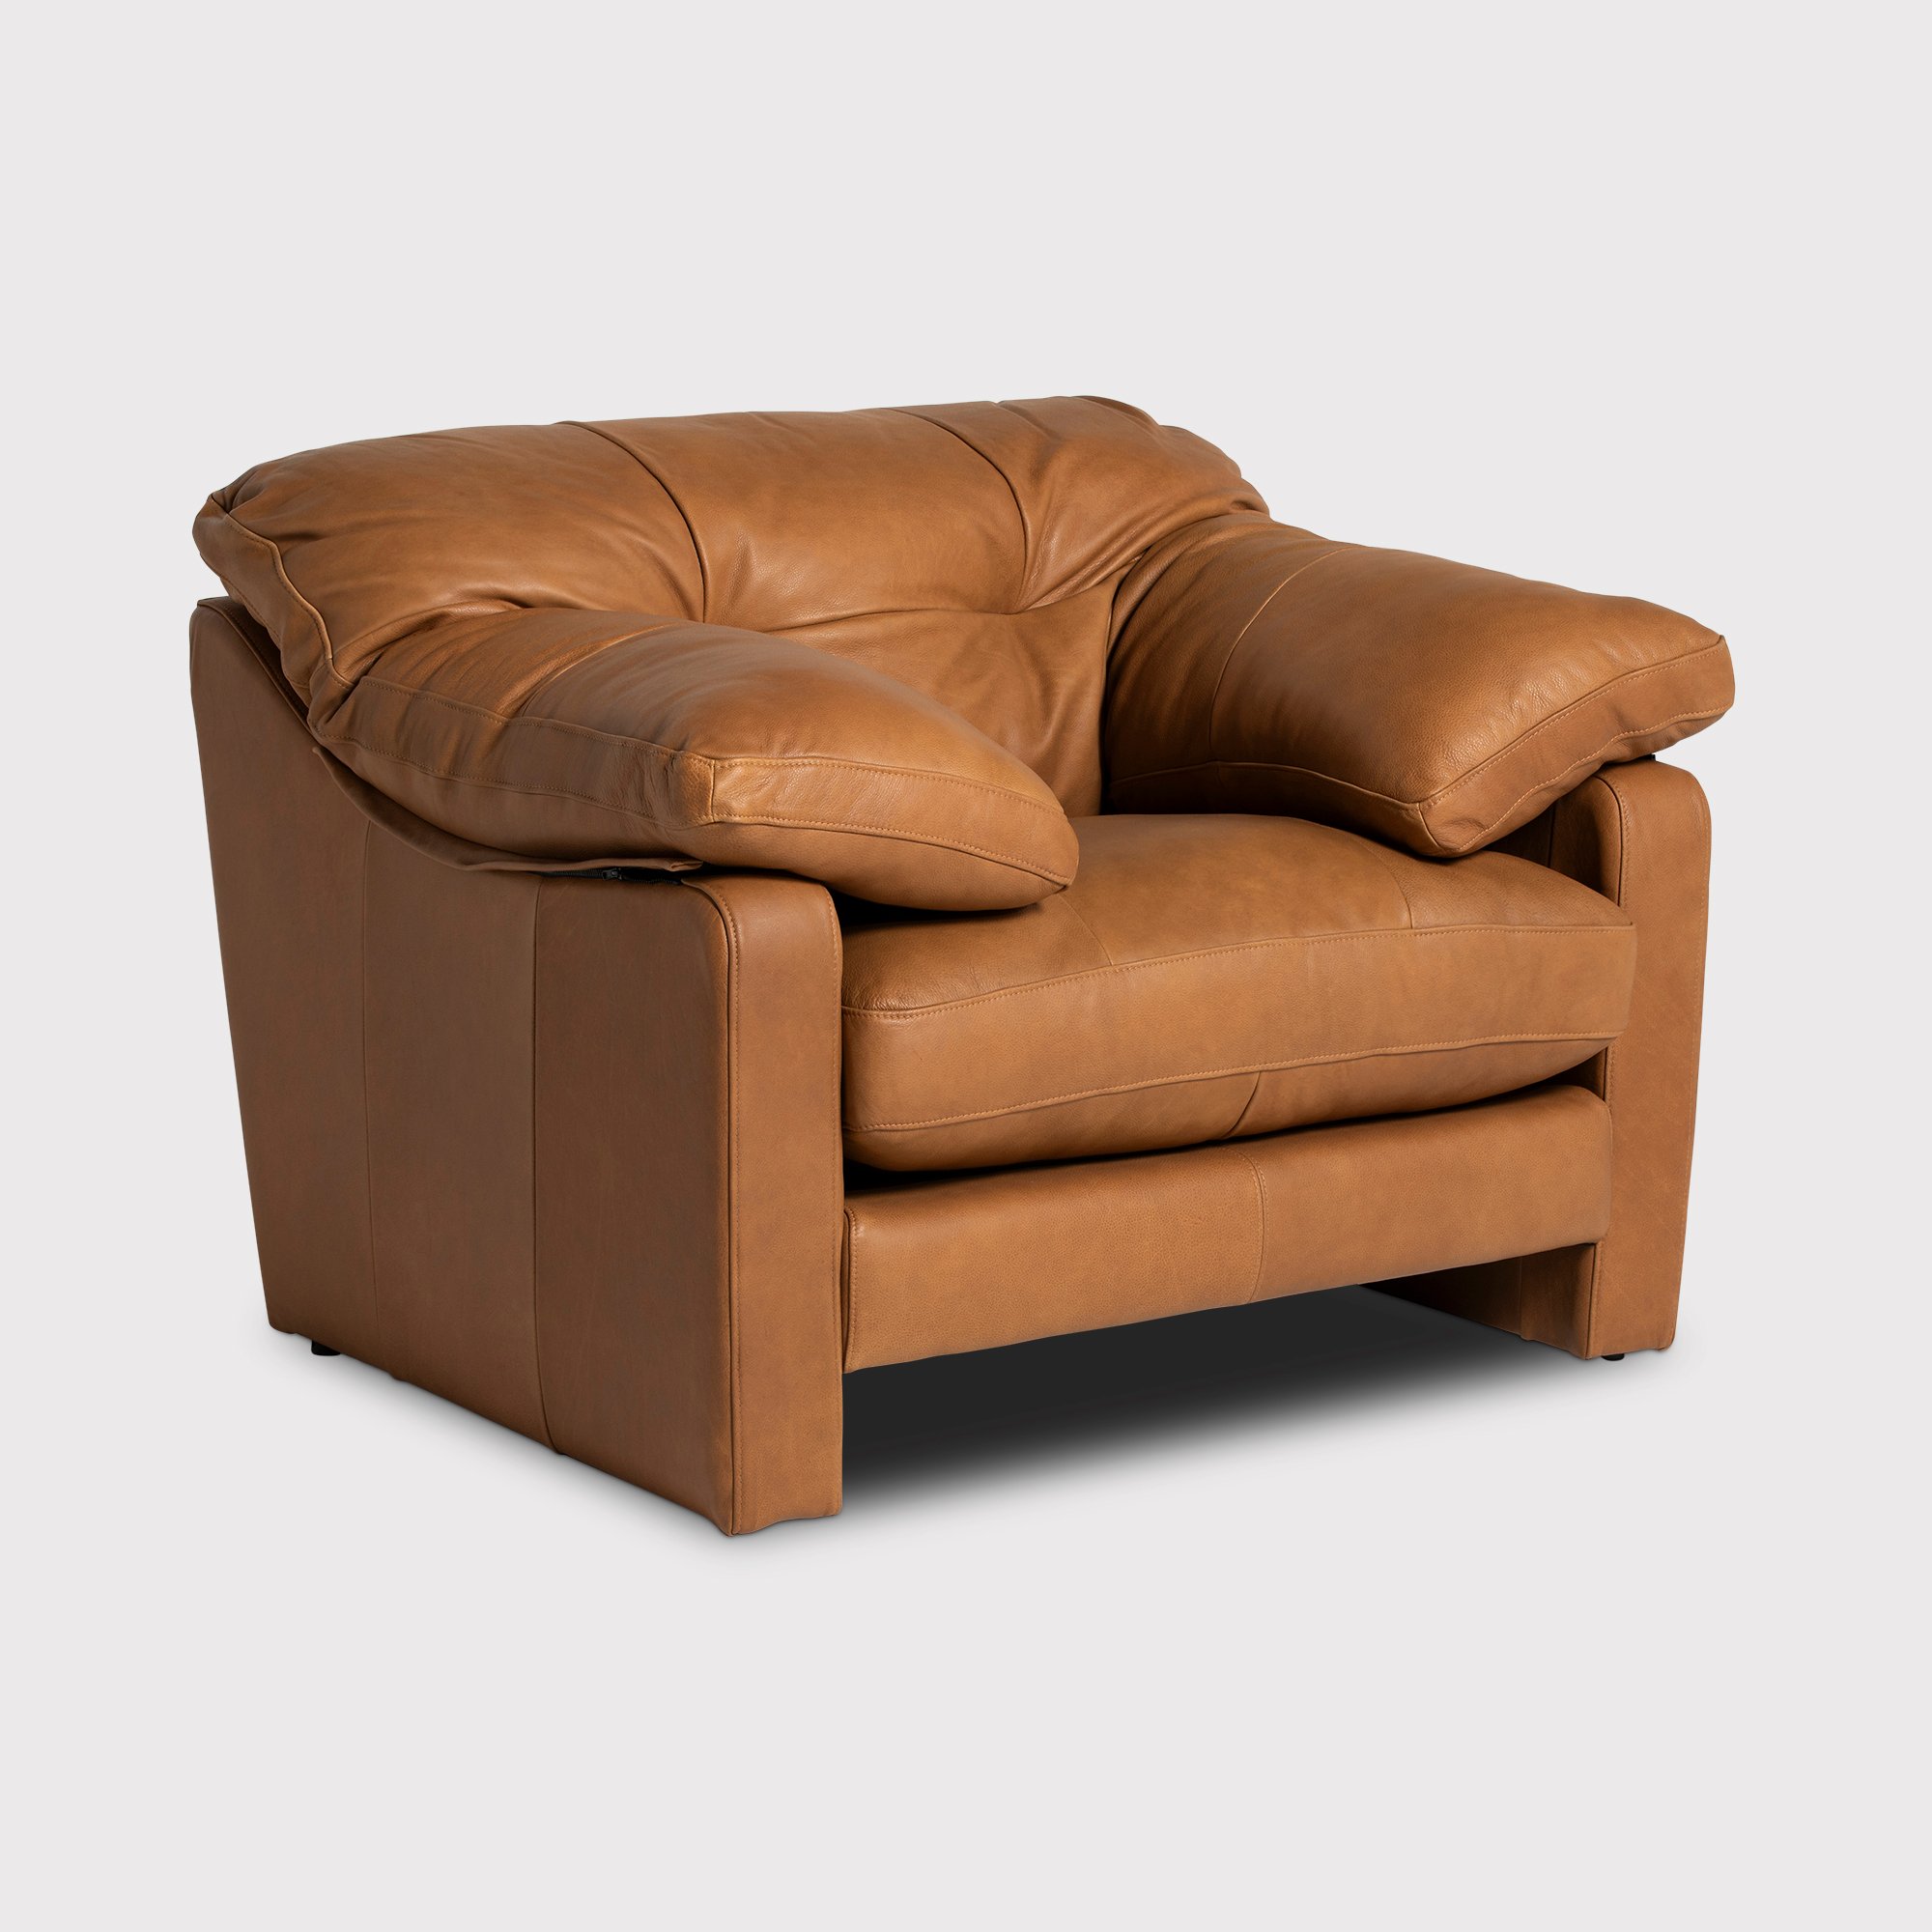 Penley Lounge Armchair, Brown Leather | Barker & Stonehouse